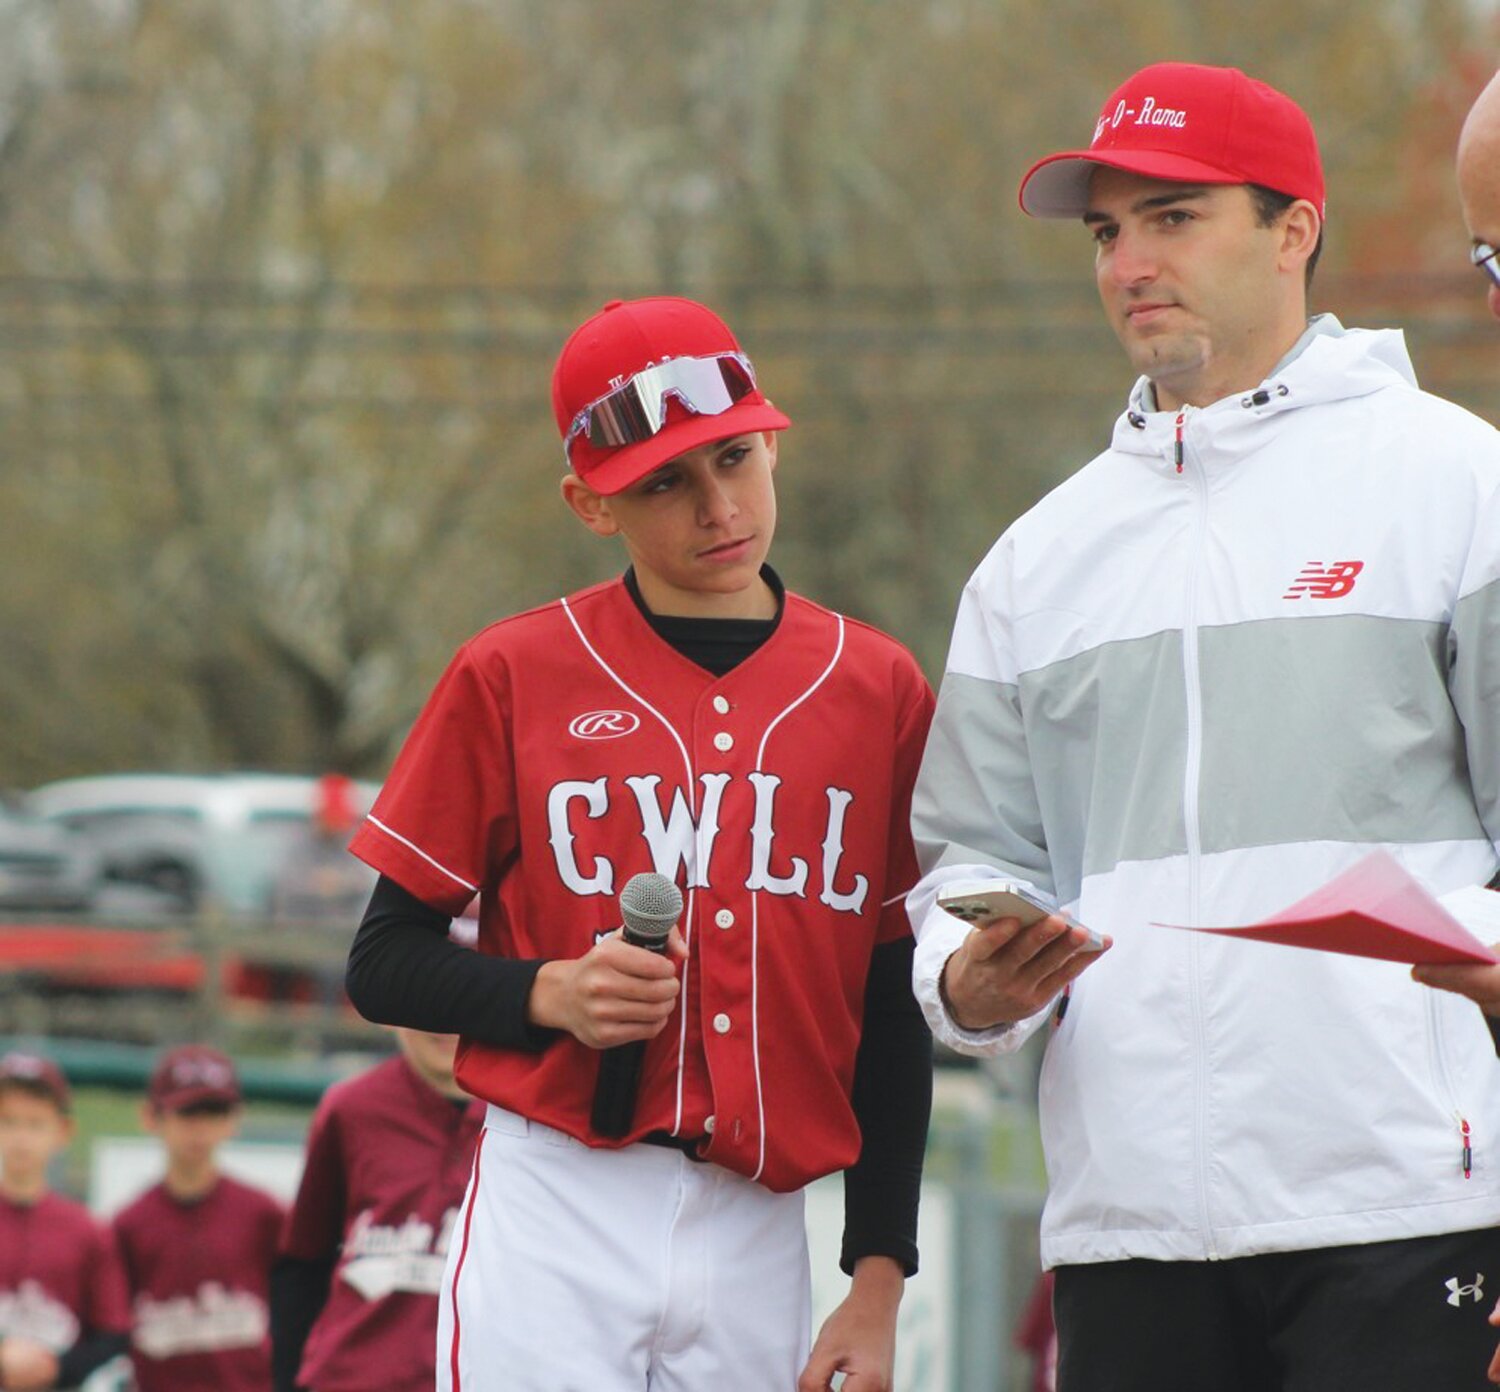 LEADING THE CHARGE: Dylan Phillips reads the Little League pledge prior to Opening Day.